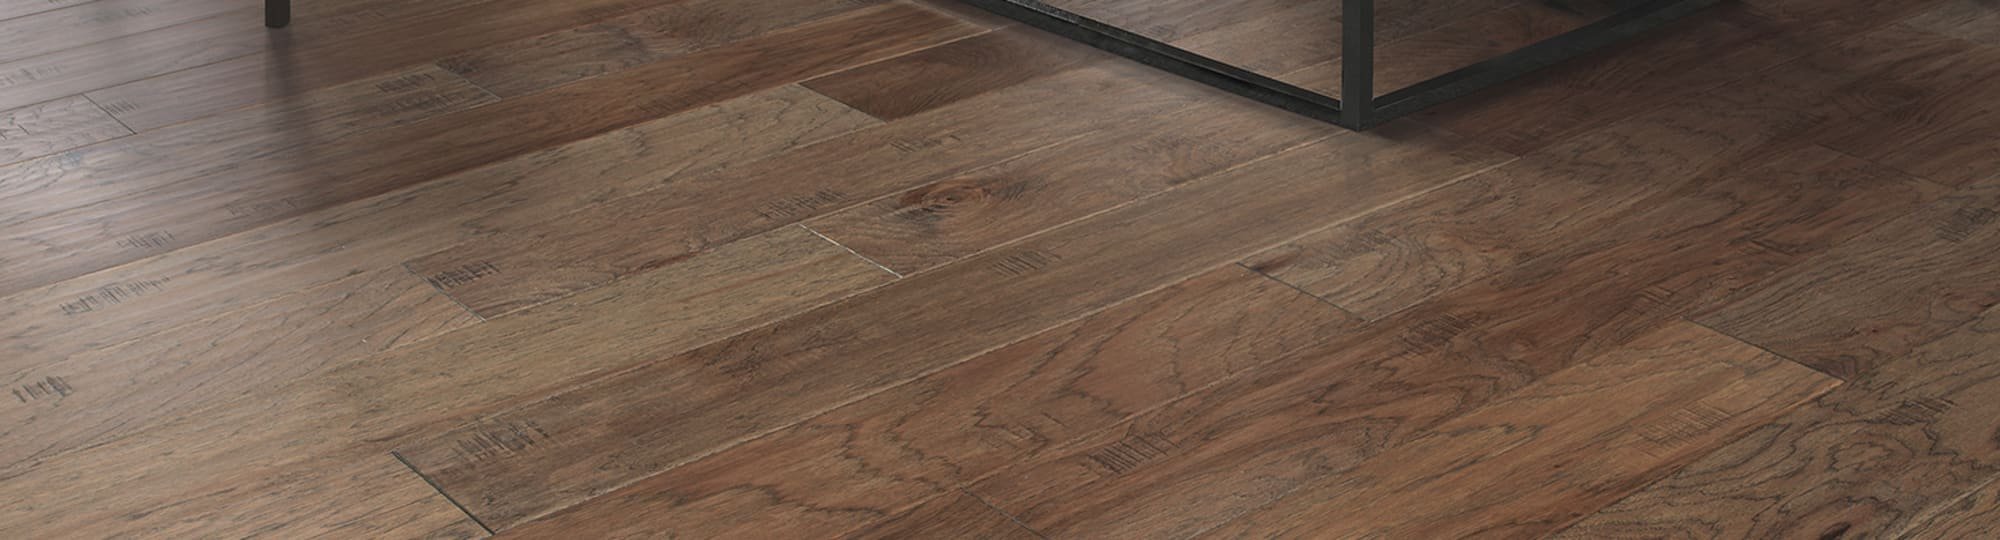 Convenient financing options available from Mohawk at Reardon's Flooring in Indianopolis, IN